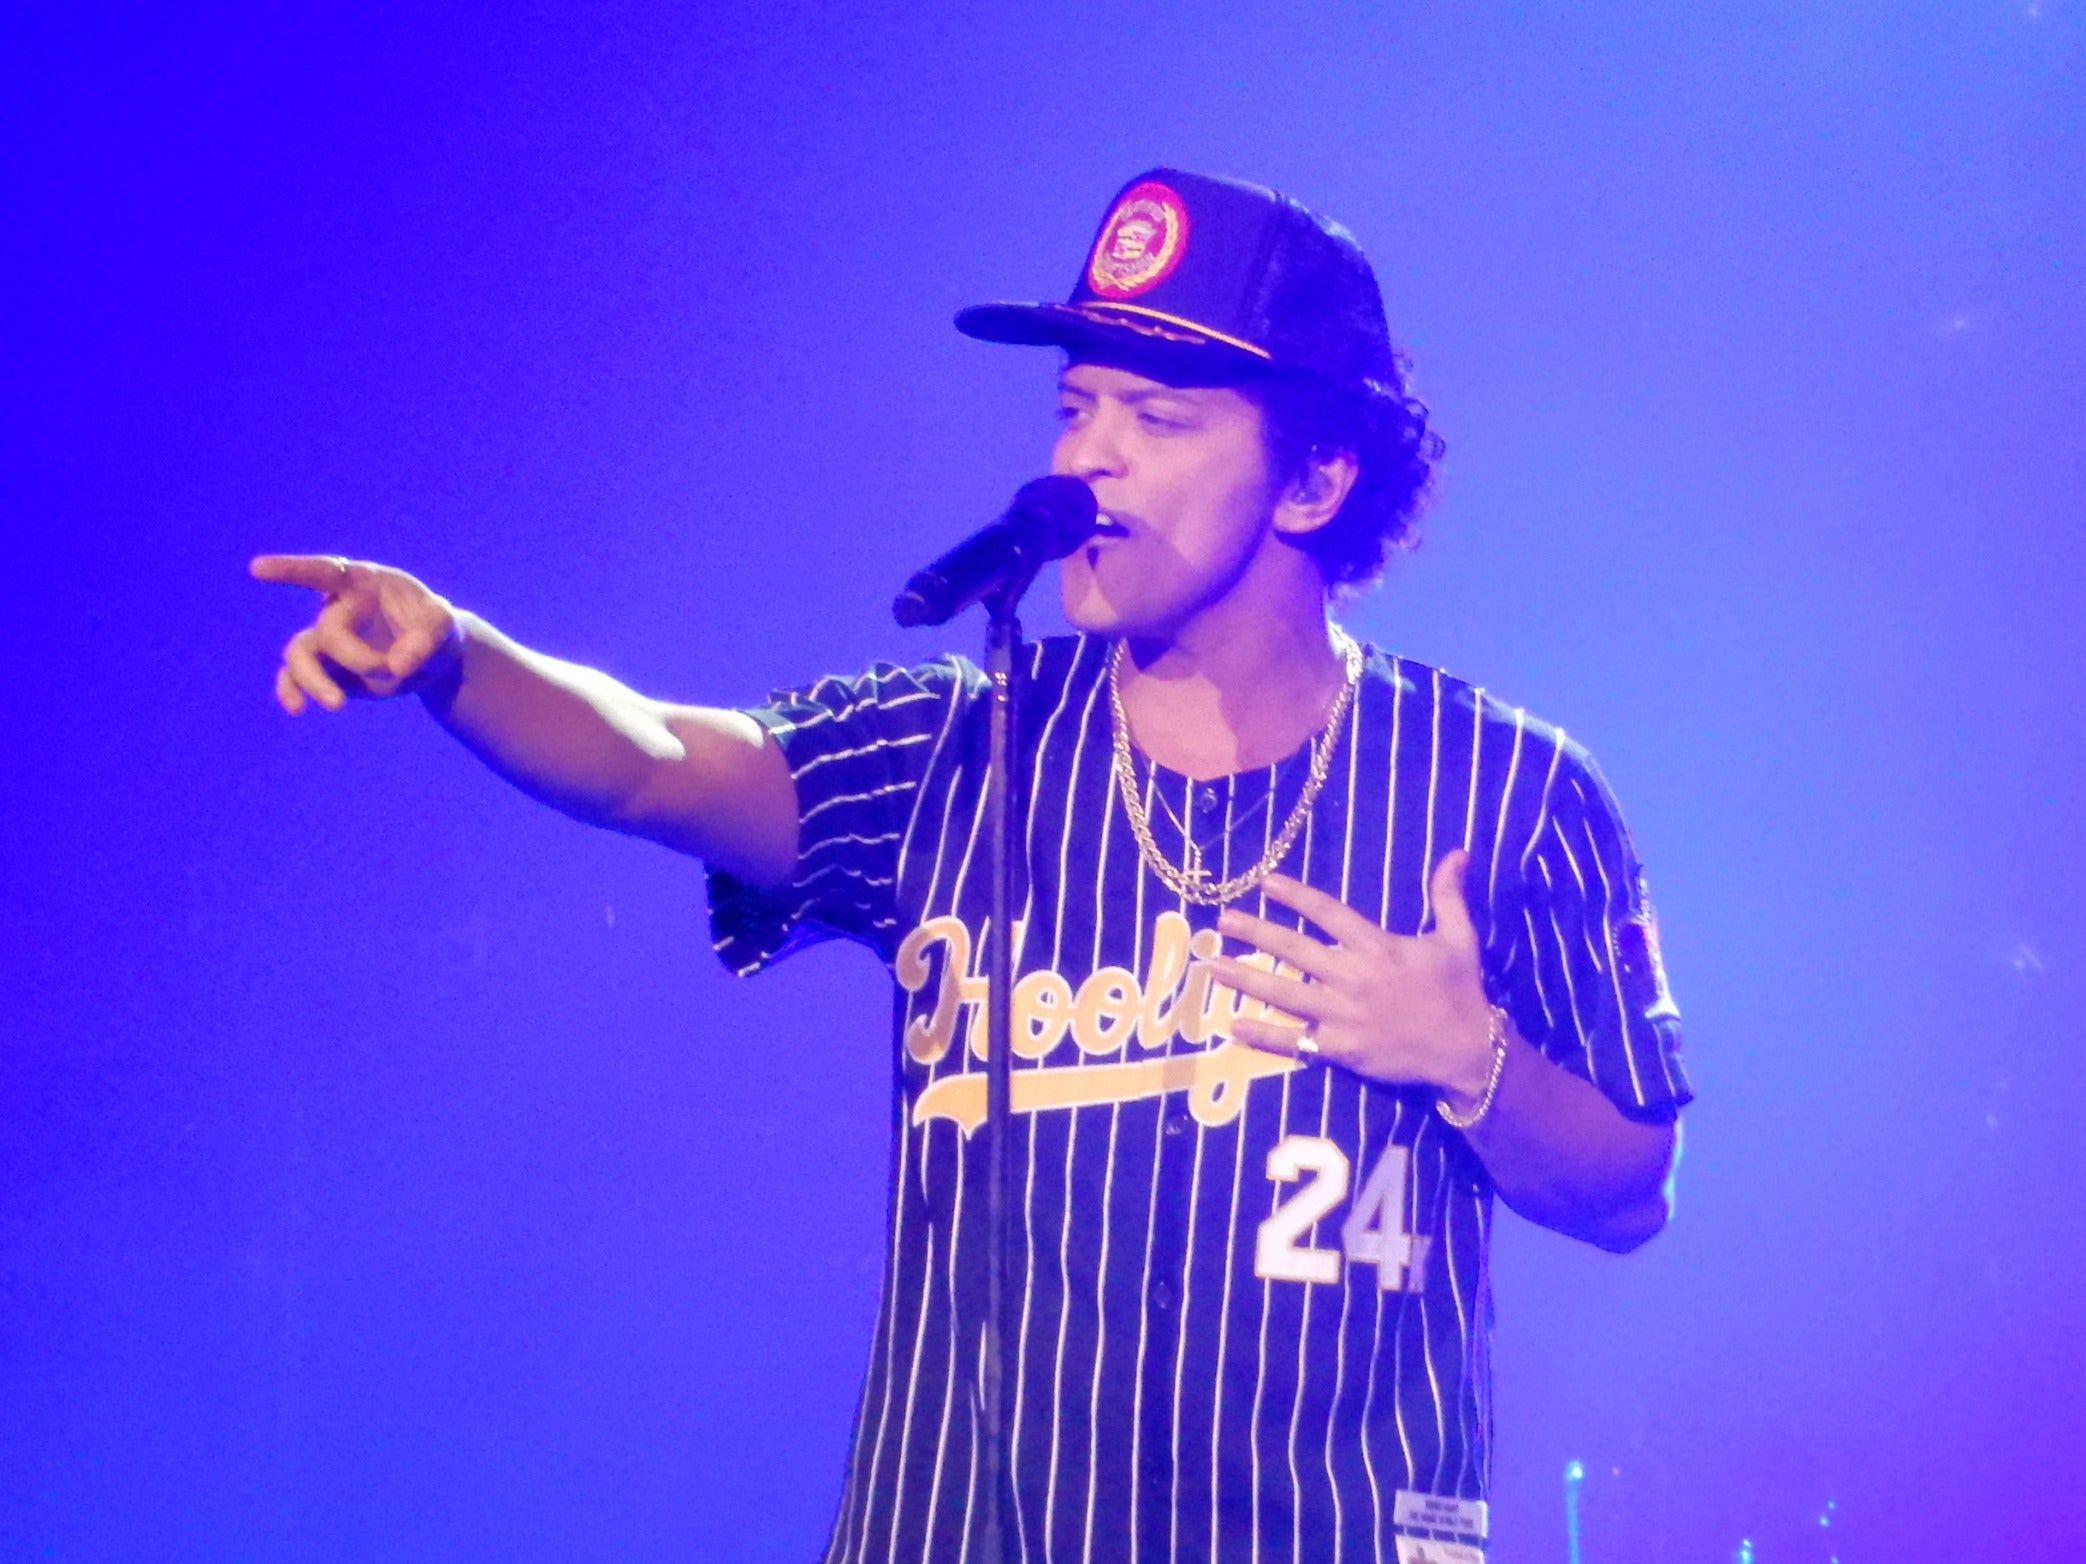 Bruno Mars is on the stage, performing with a microphone in front of him. He is pointing his hand towards the right side.